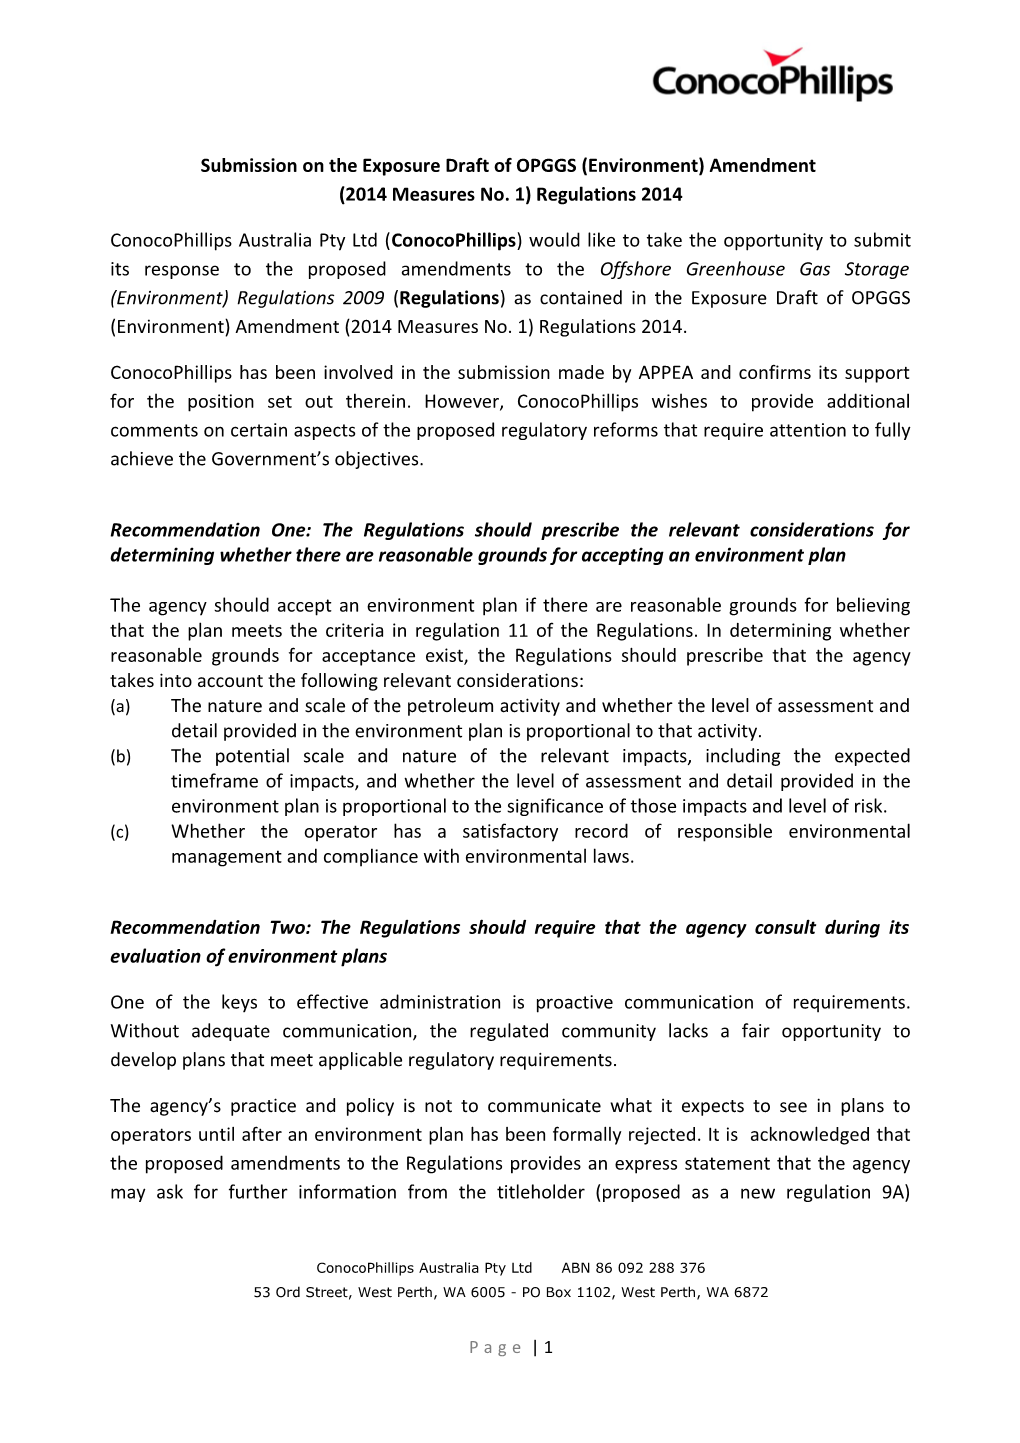 Submission on the Exposure Draft of OPGGS (Environment) Amendment (2014 Measures No. 1)